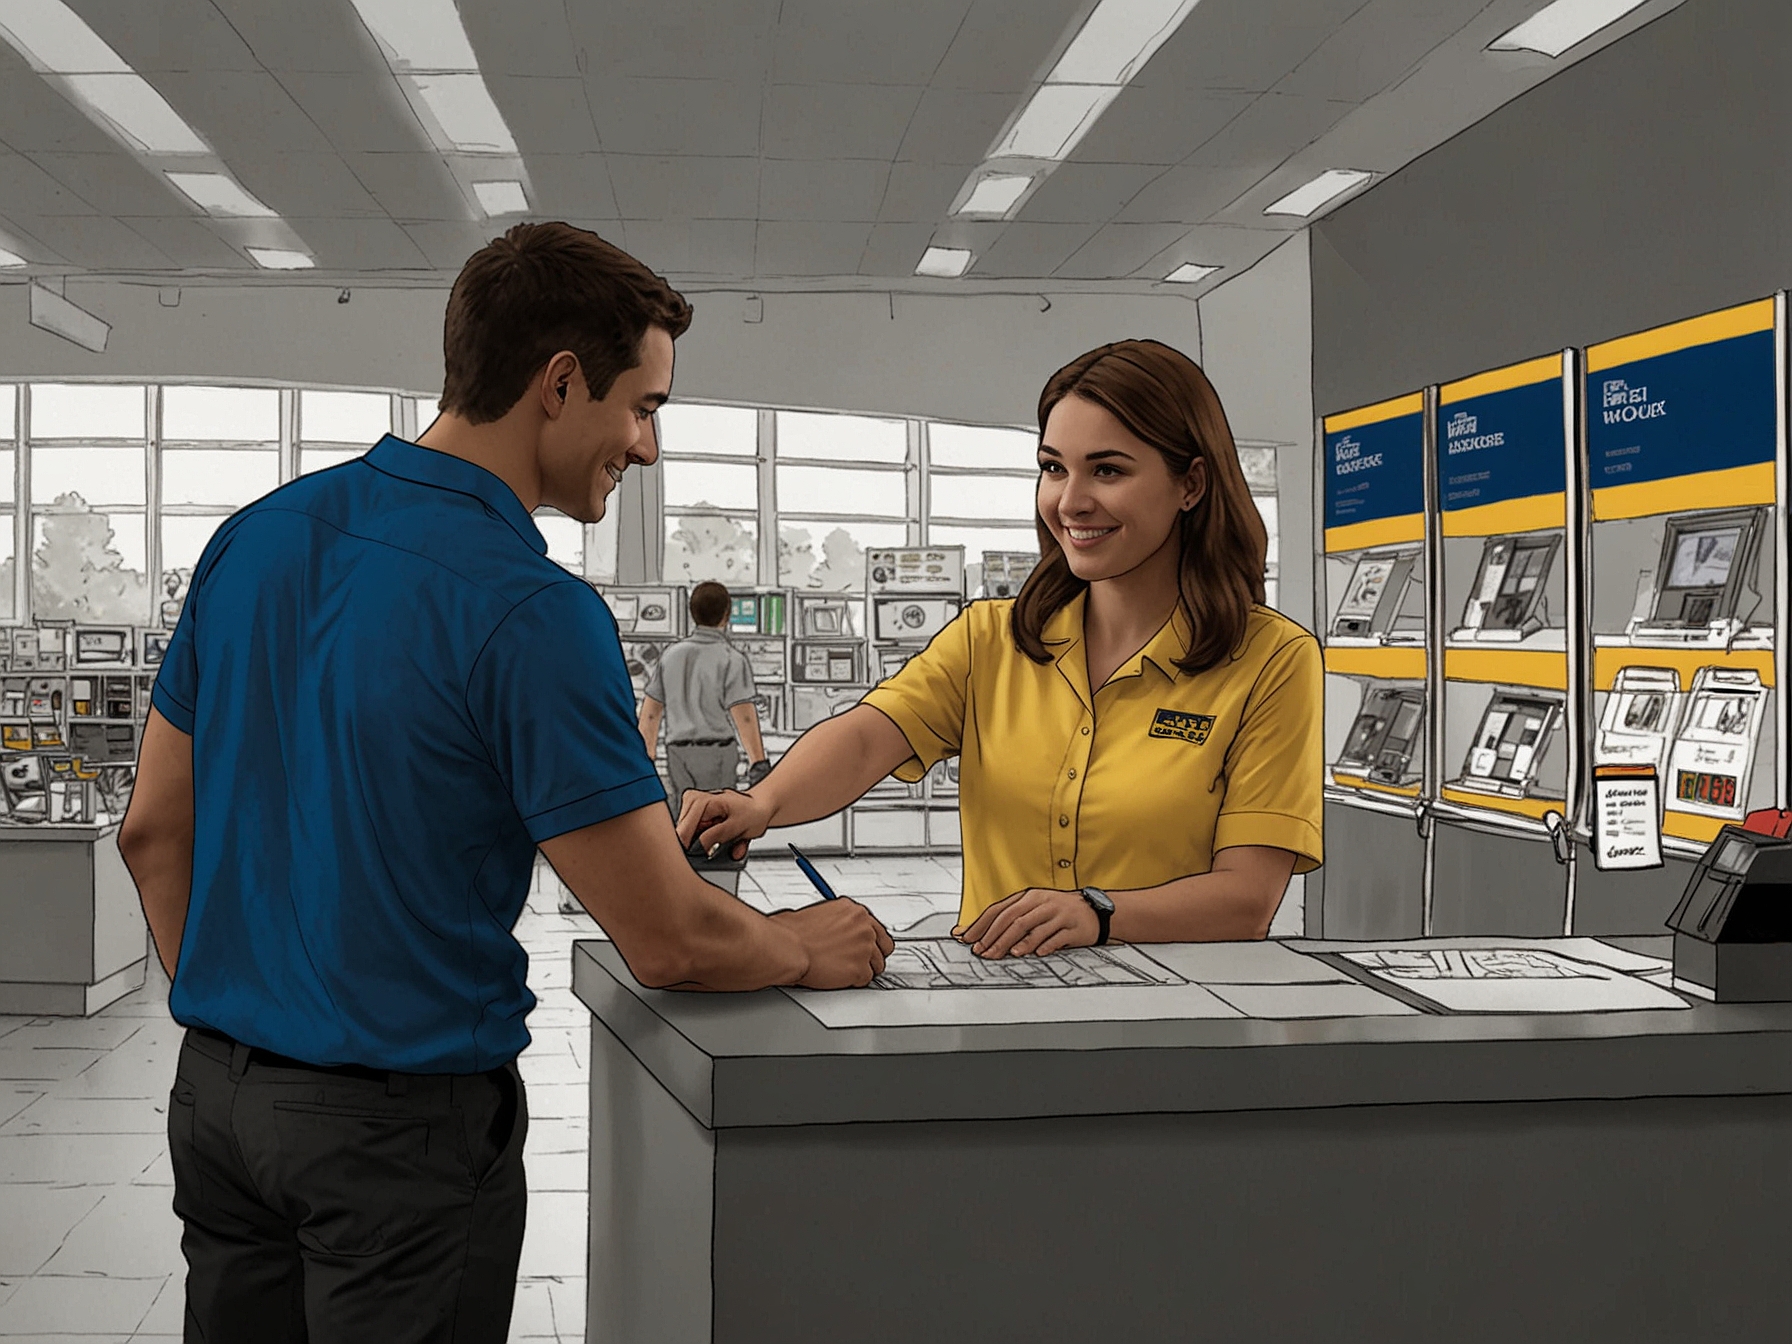 A Best Buy employee assisting a customer in selecting the perfect Windows Copilot device, demonstrating knowledgeable support and high-quality service in-store.